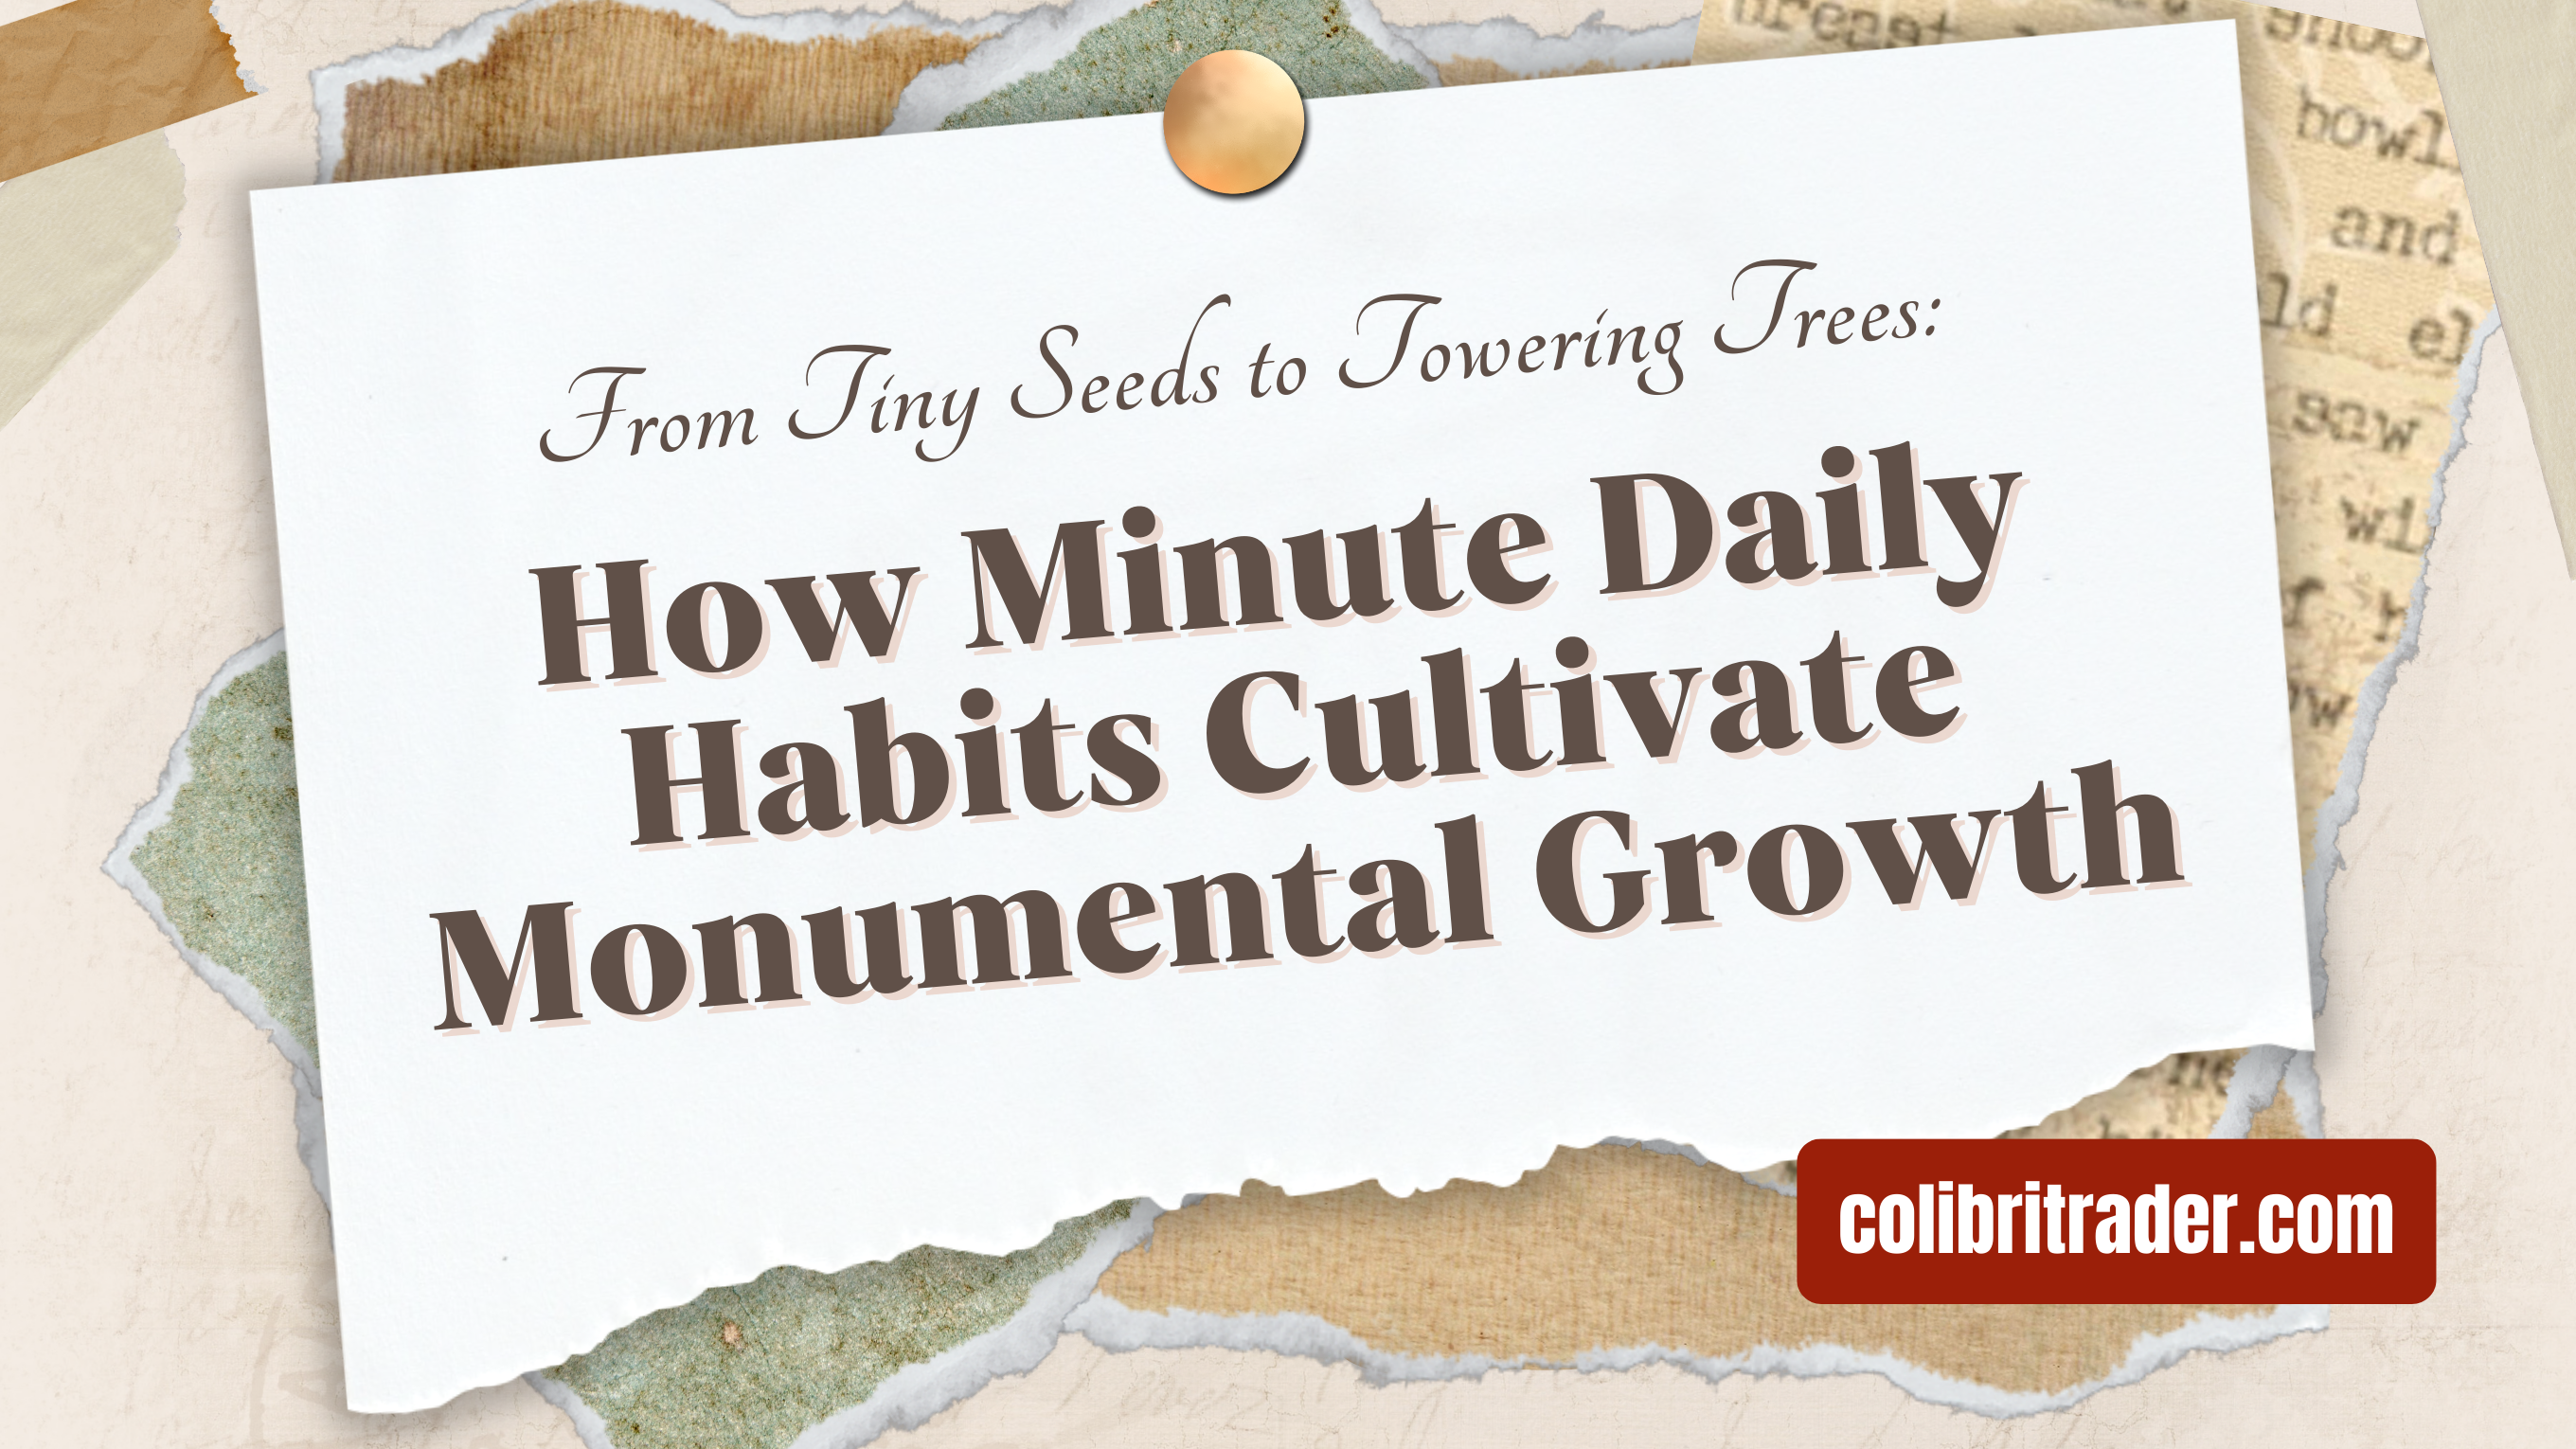 From Tiny Seeds to Towering Trees: How Minute Daily Habits Cultivate Monumental Growth